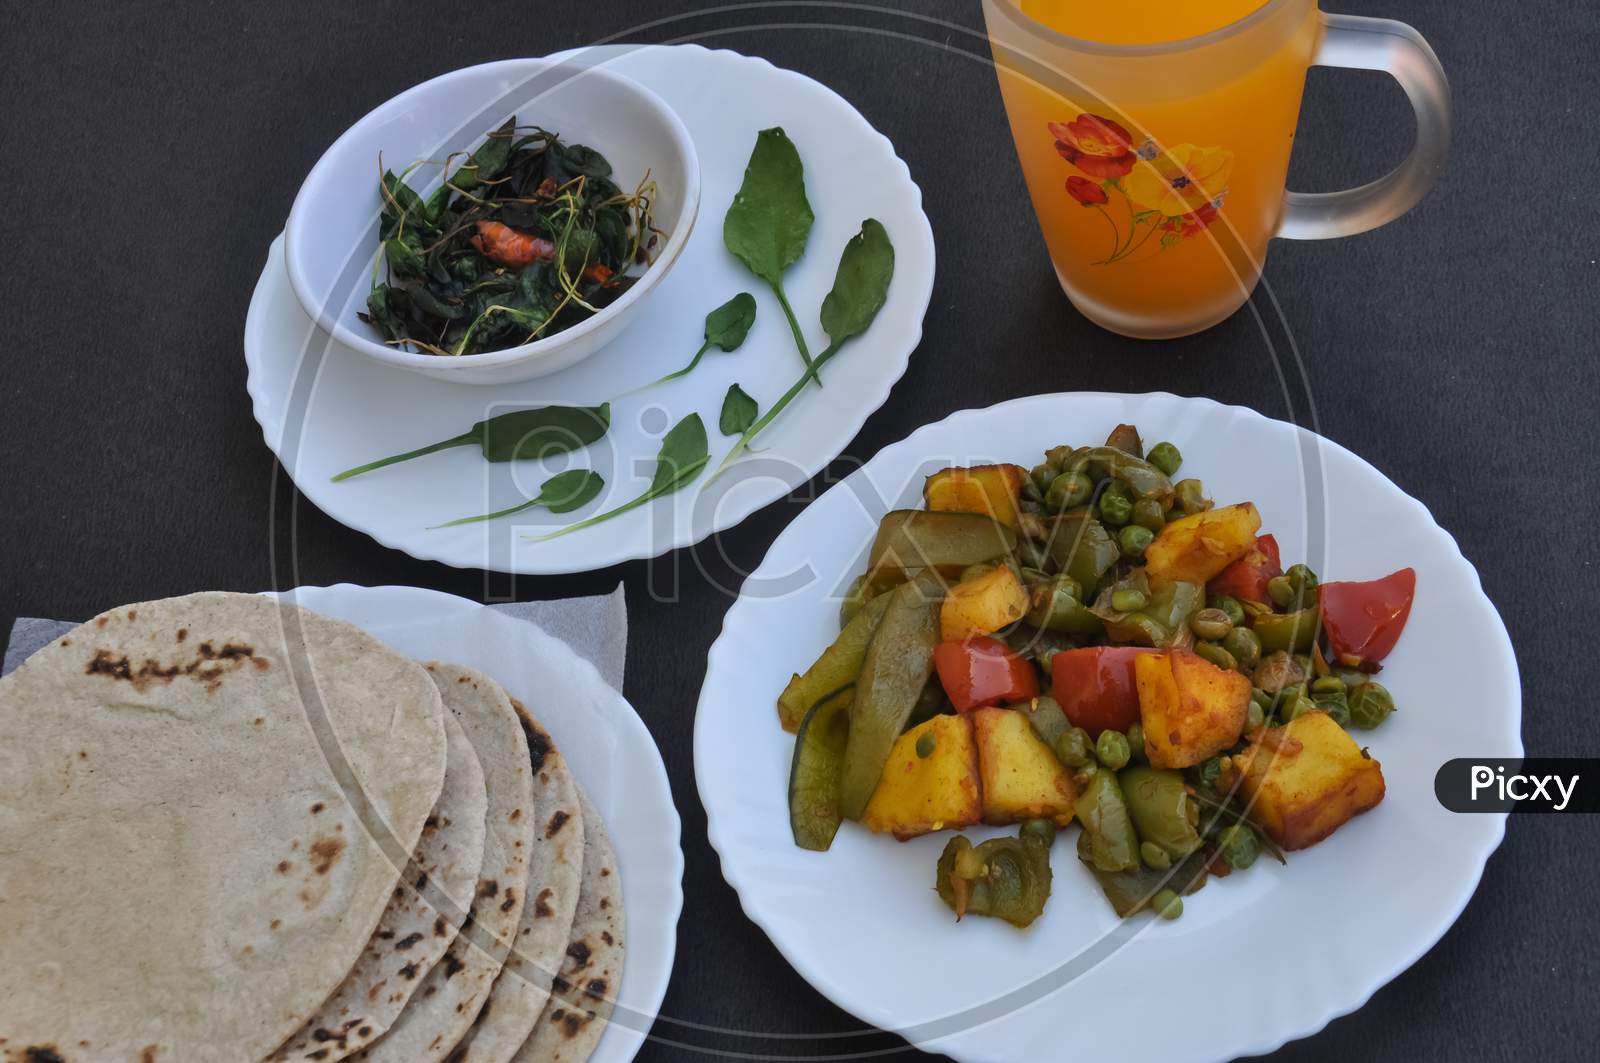 Photo of matar paneer mix veg, saag (greens) and roti (Indian bread) on white plates and juice on glass over black table